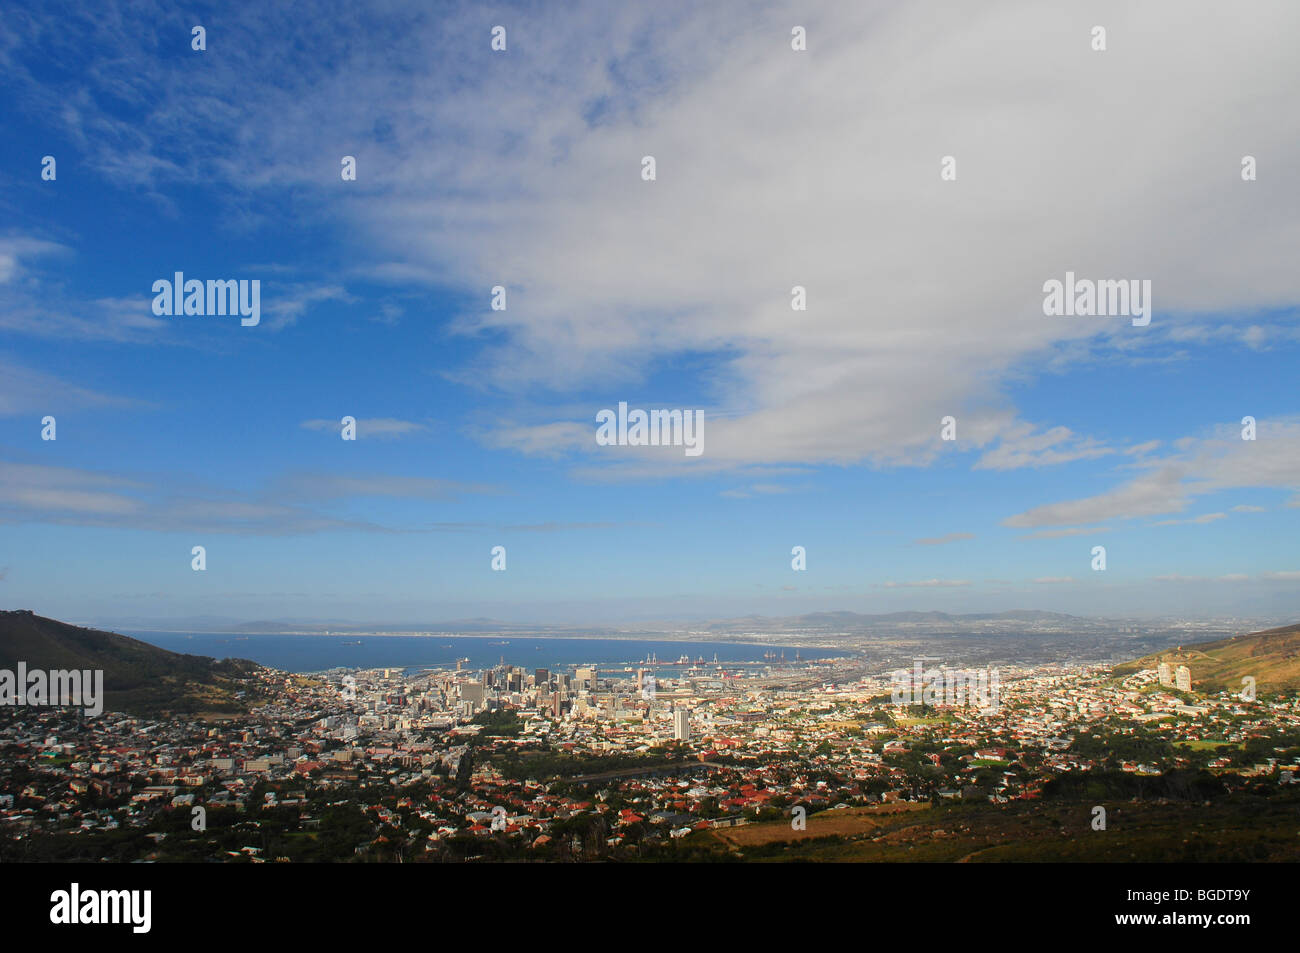 A landscape Photograph of the city of Cape Town, South Africa Stock Photo